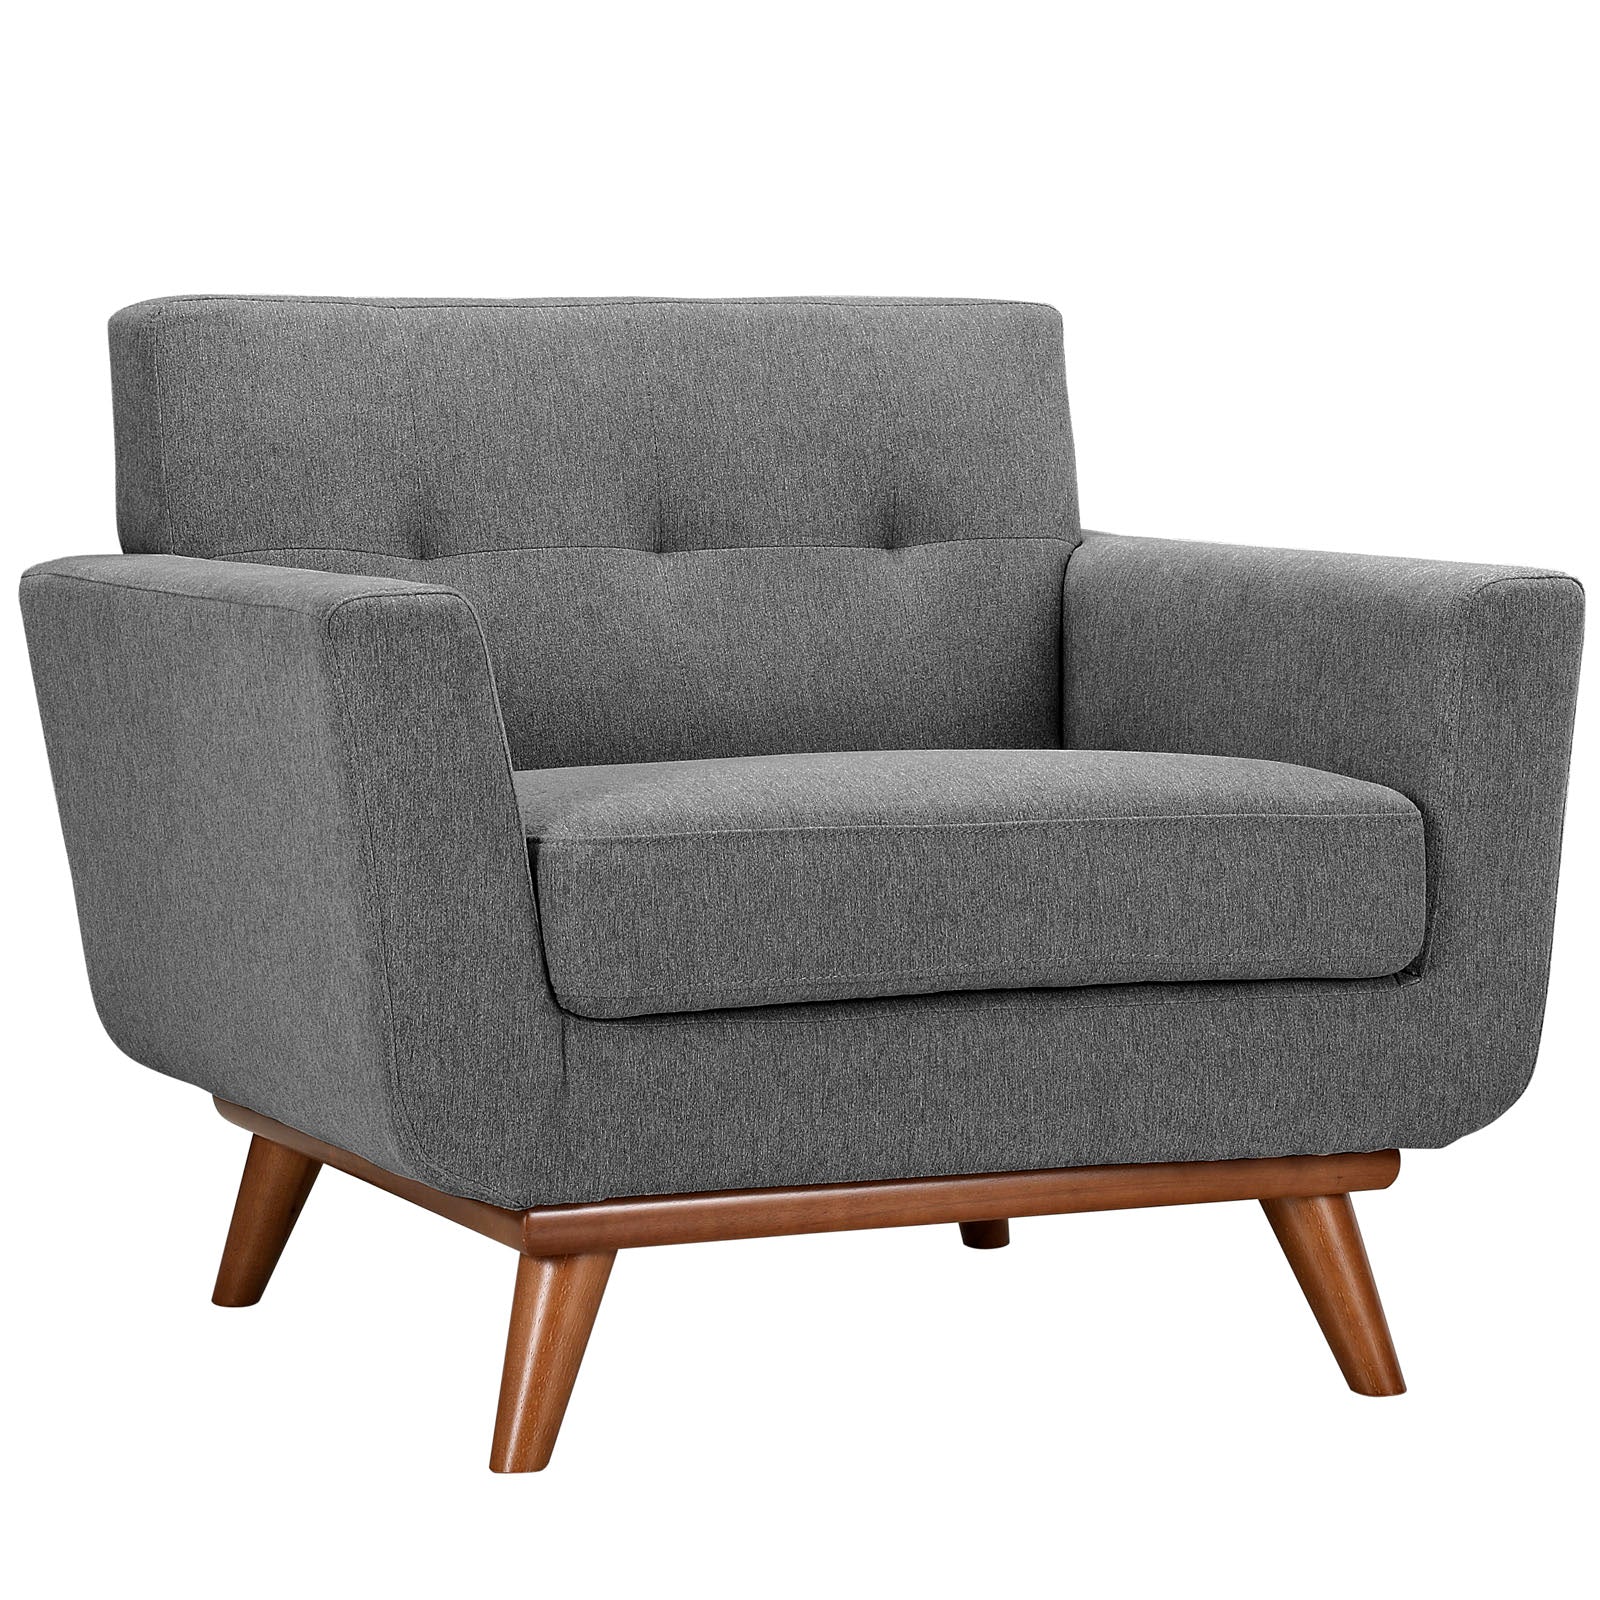 Modway Living Room Sets - Engage Sofa Loveseat and Armchair Set of 3 Expectation Gray